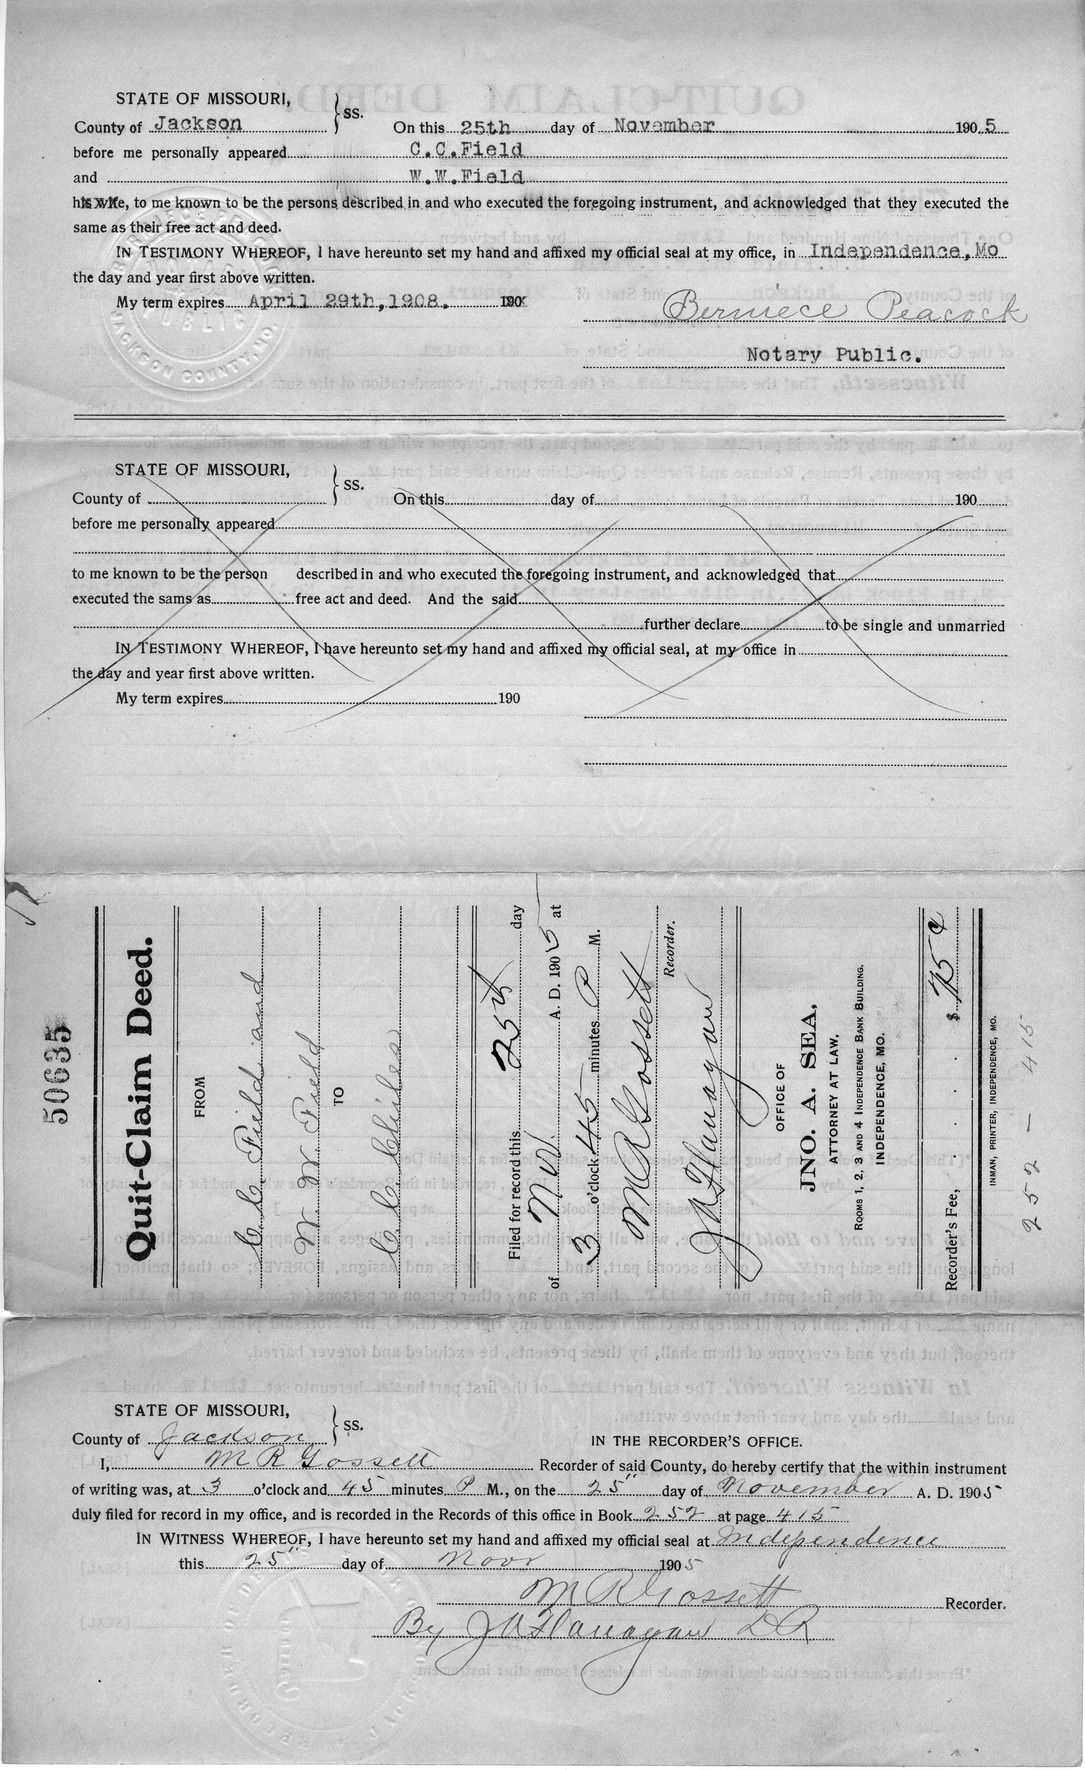 Quit-Claim Deed from C. C. Field and W. W. Field to C. C. Chiles